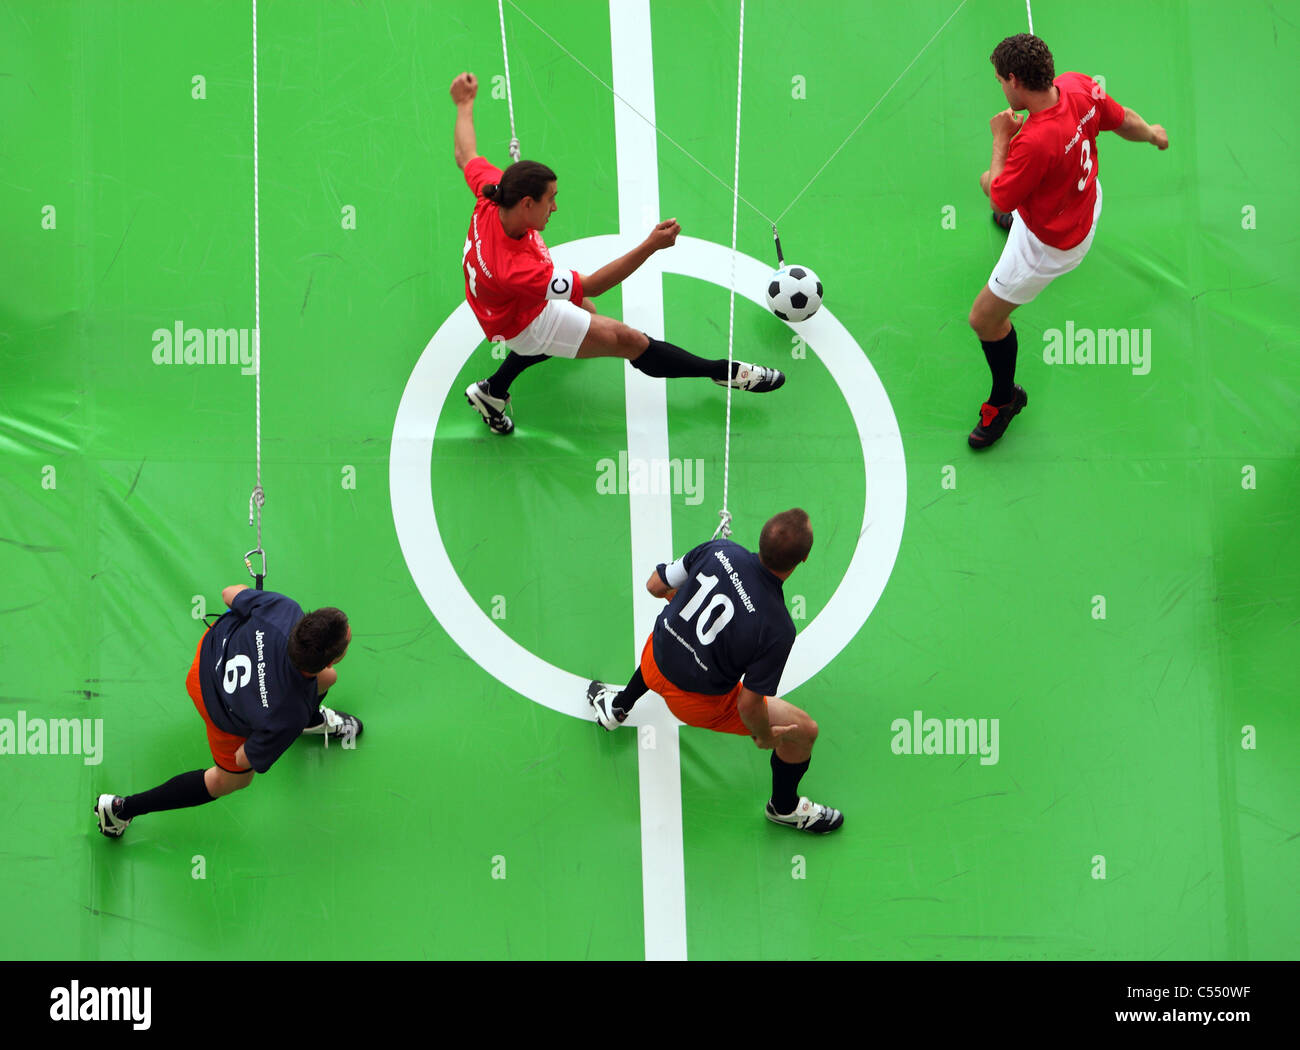 Football players hanging on ropes, playing football on a vertical field, Munich, Germany Stock Photo